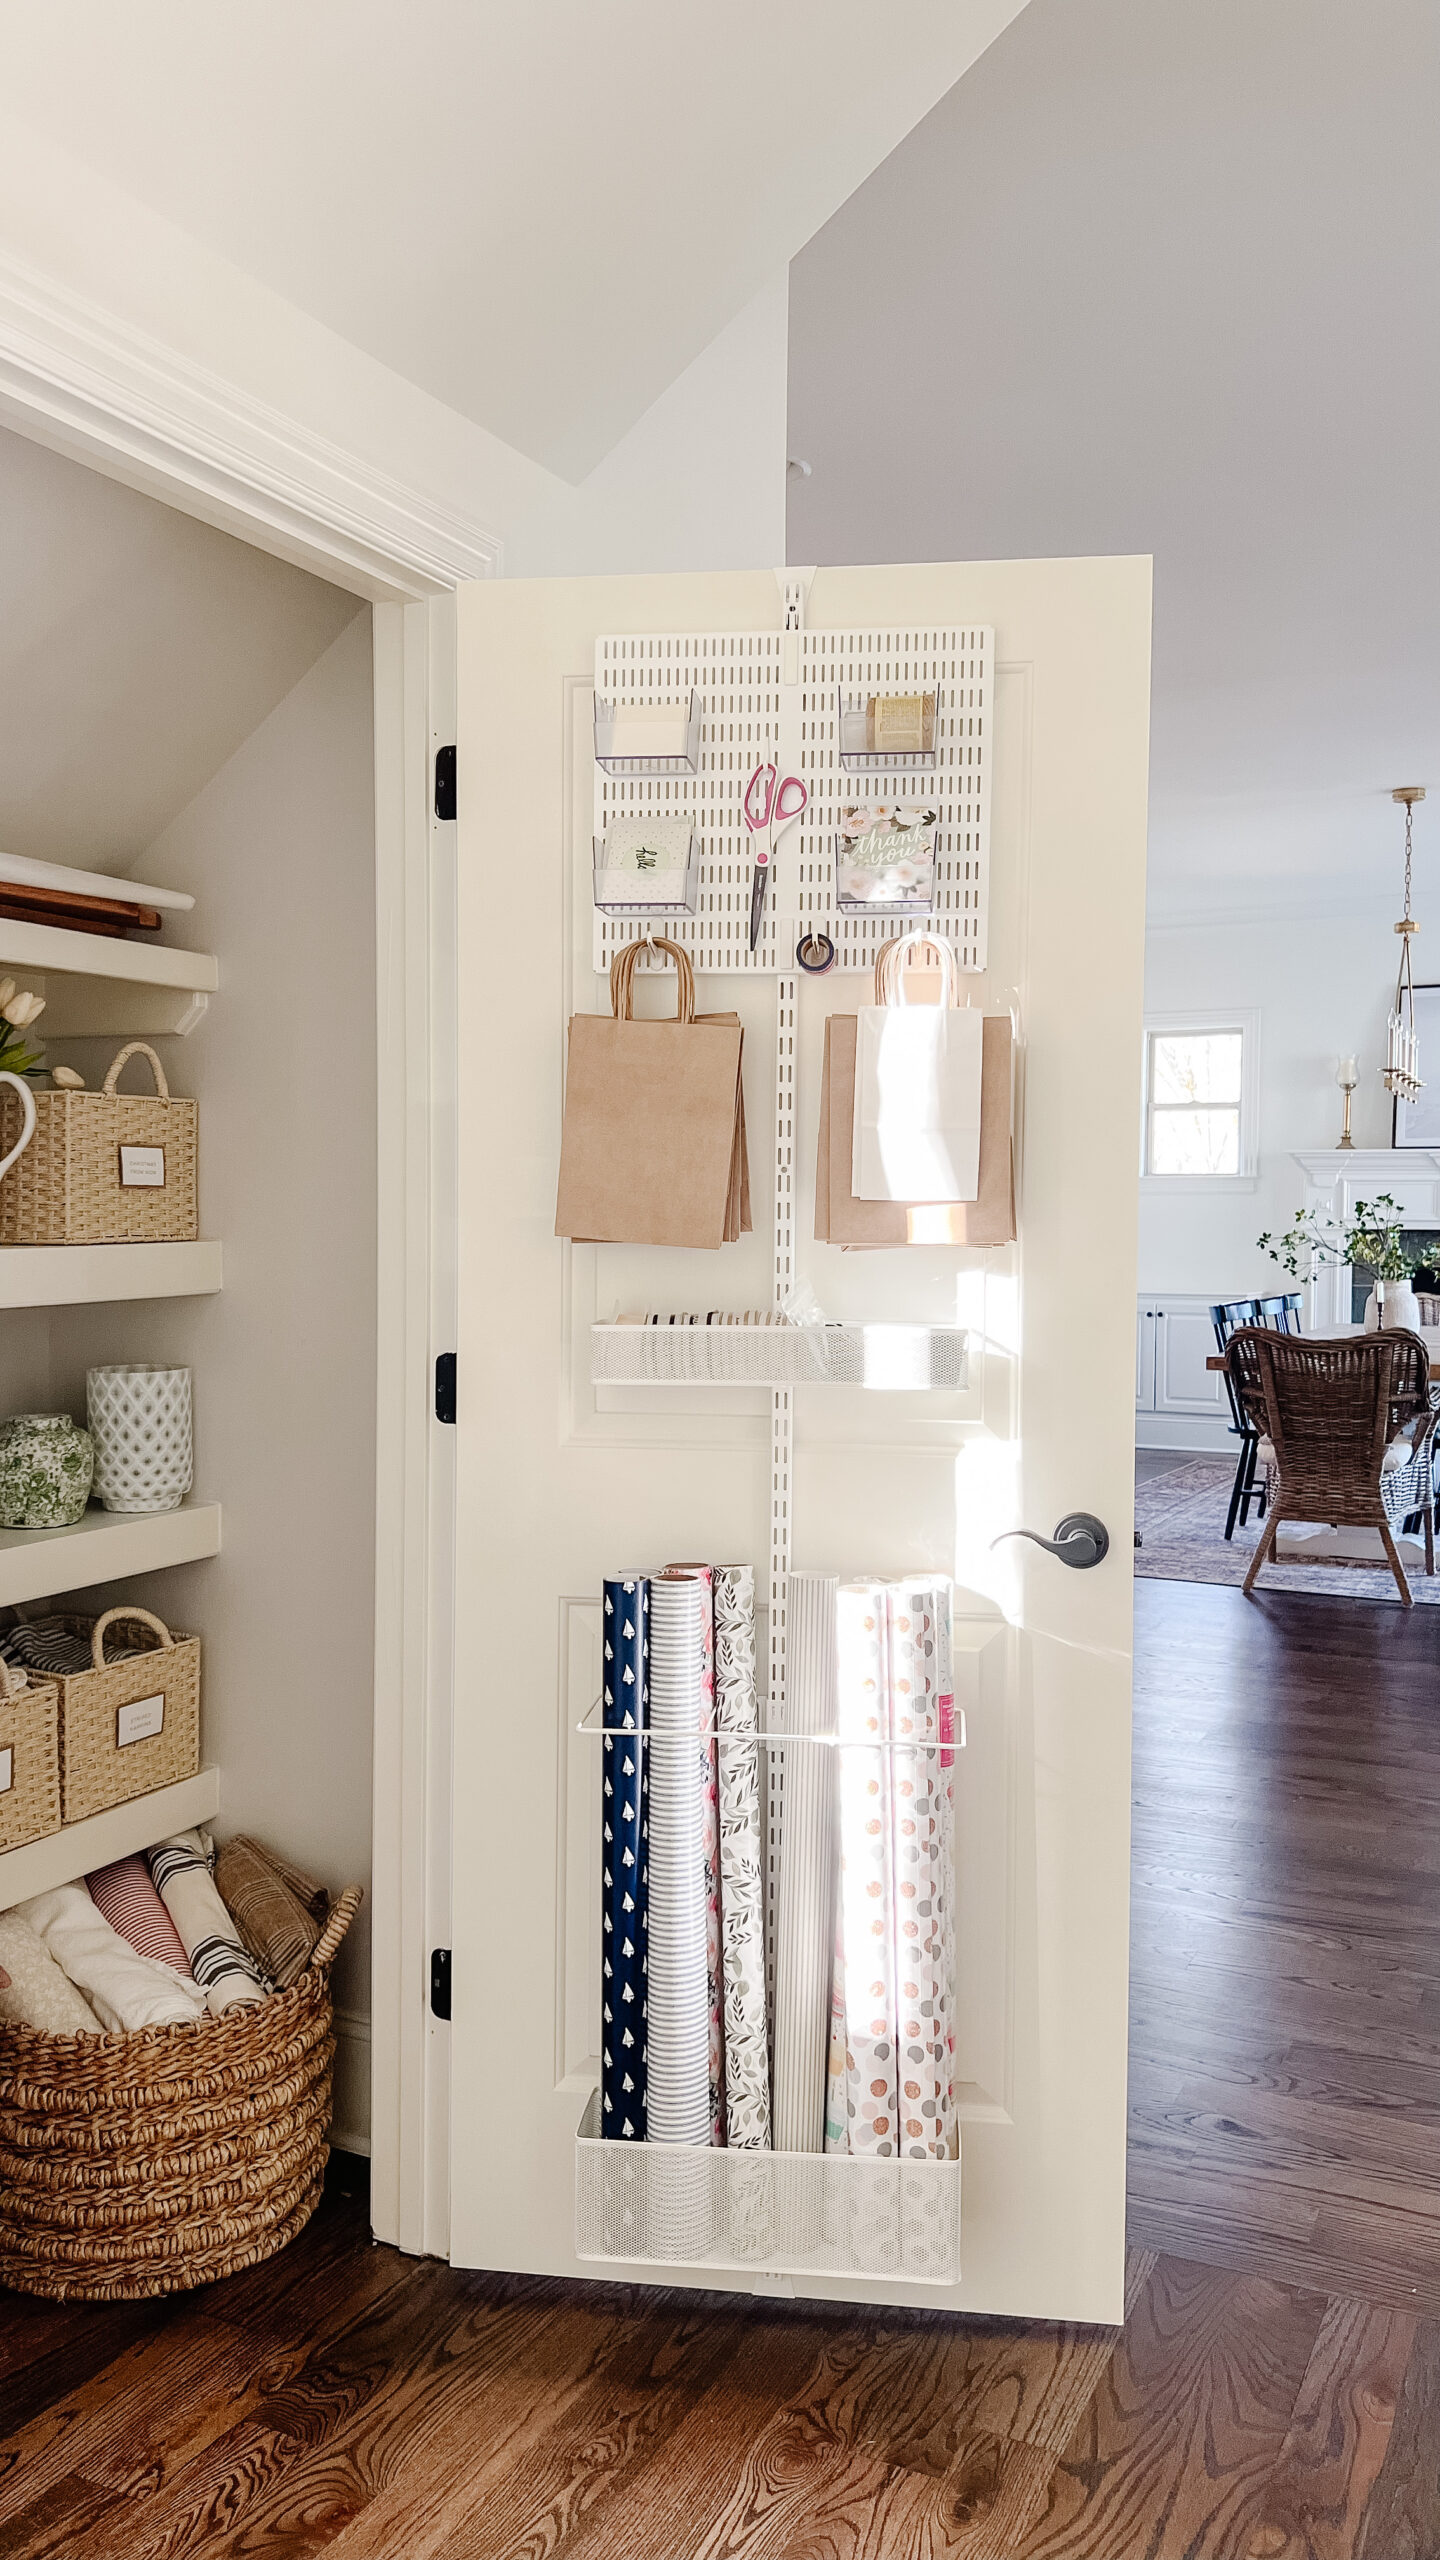 Let's Get Organized  Door Storage - A Thoughtful Place